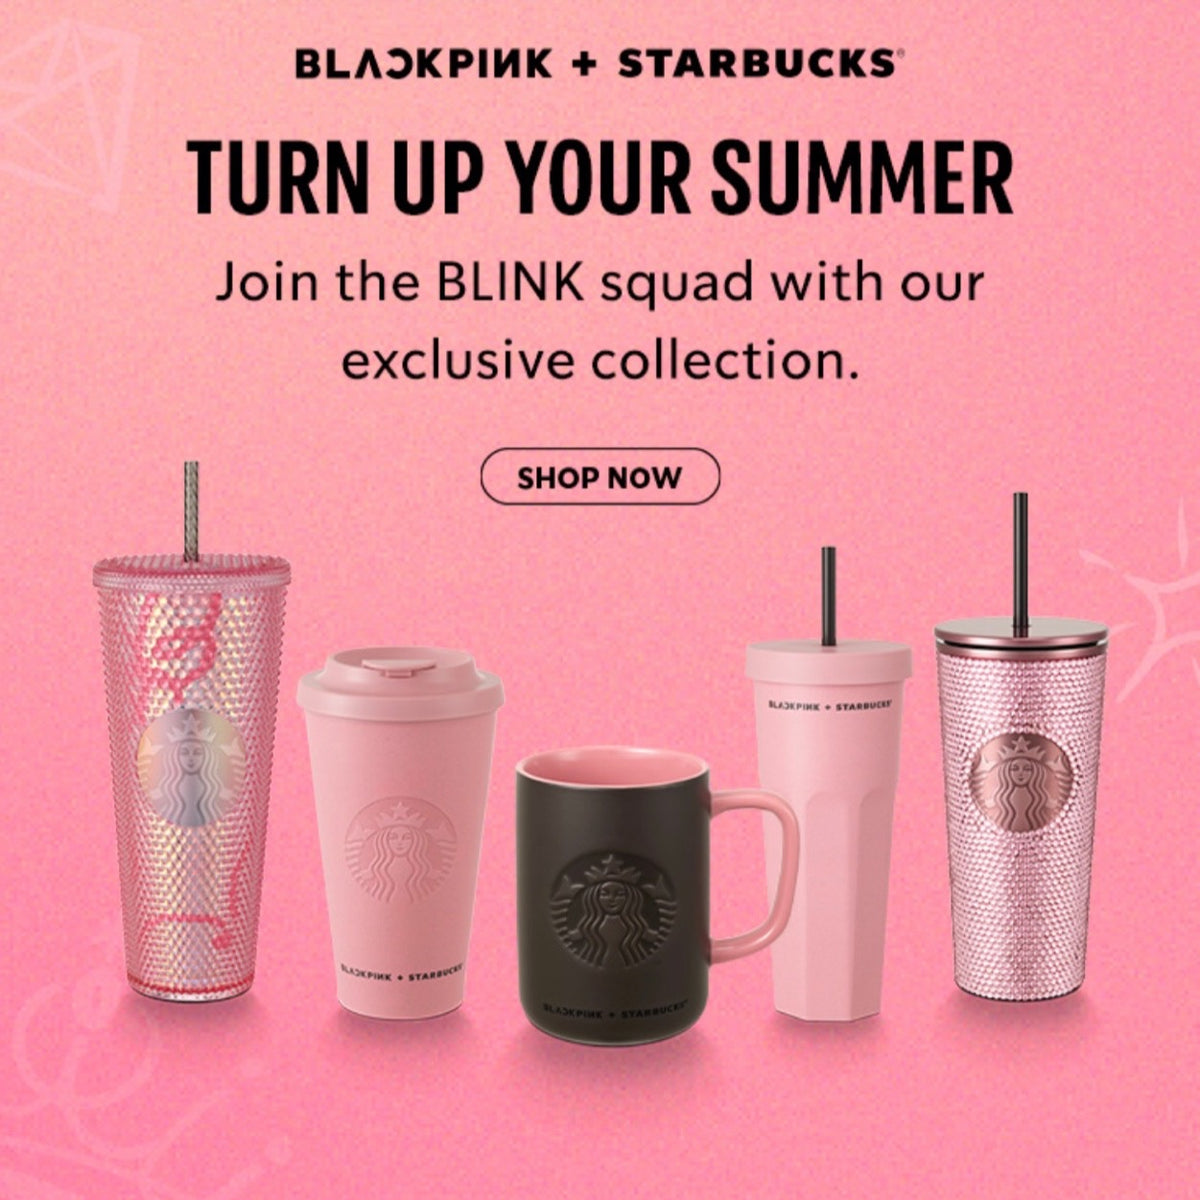 BLACKPINK + STARBUCKS Official Collaboration Turn Up Your Summer